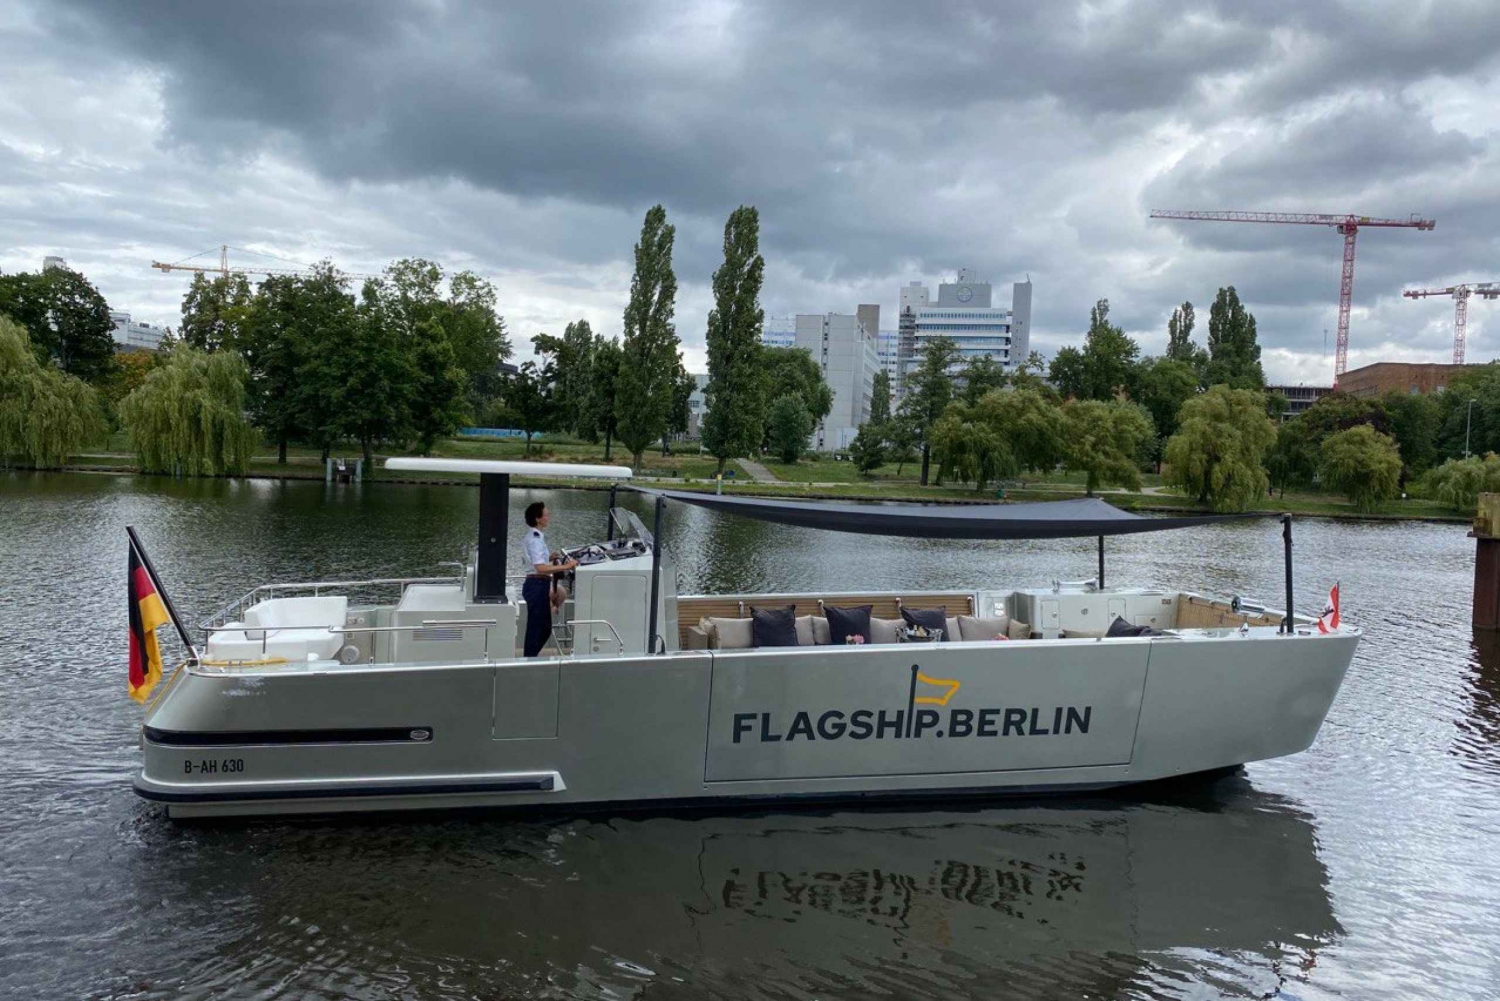 Berlin boat: Sightseeing on an unique Superyacht tender